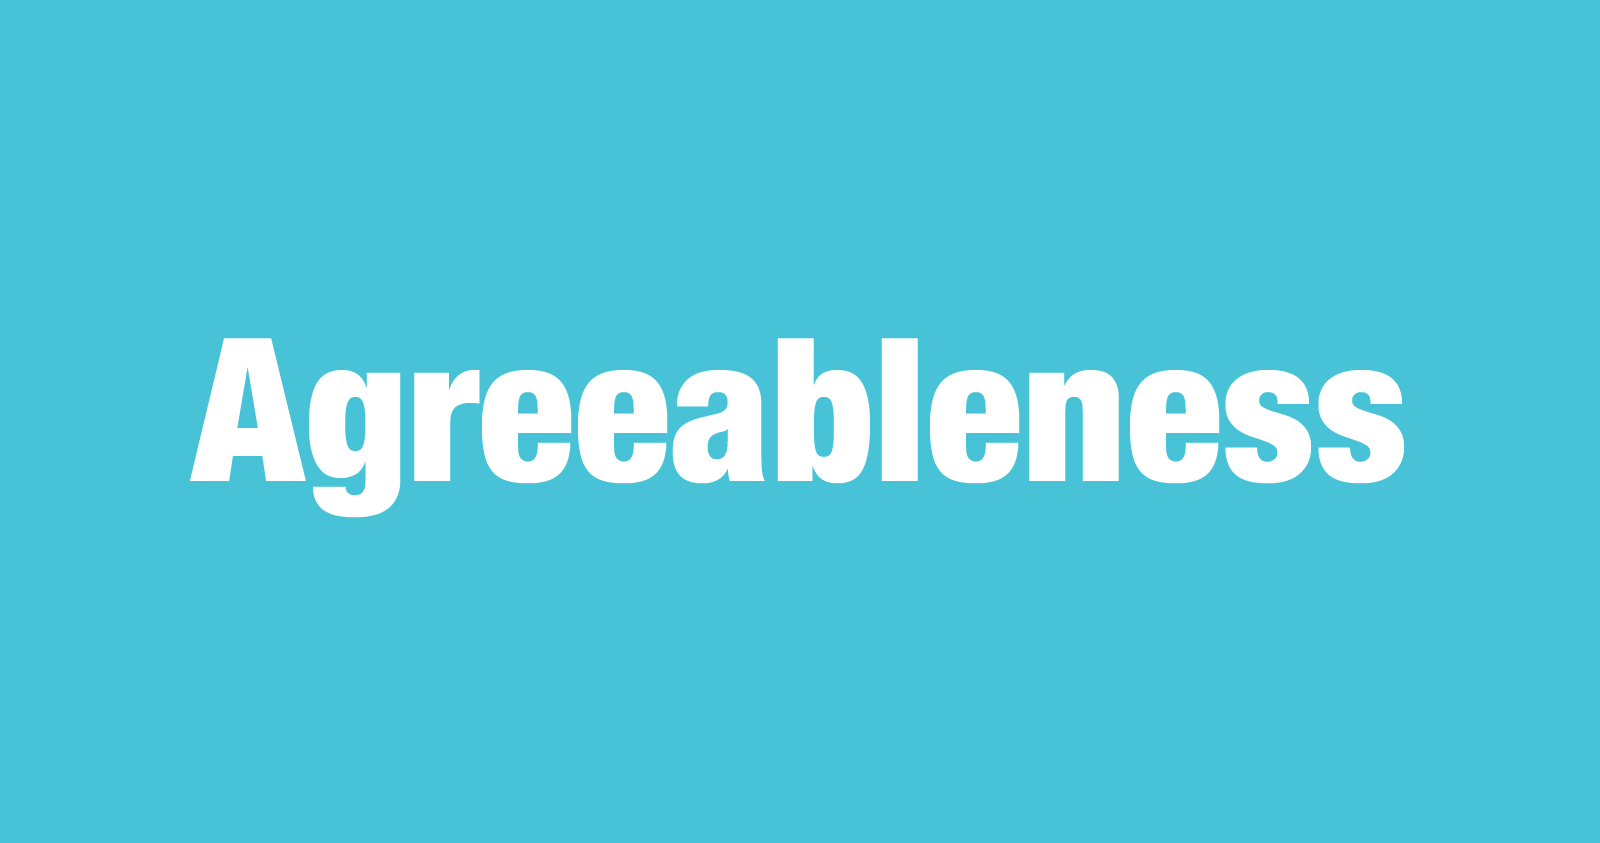 What is Agreeableness?